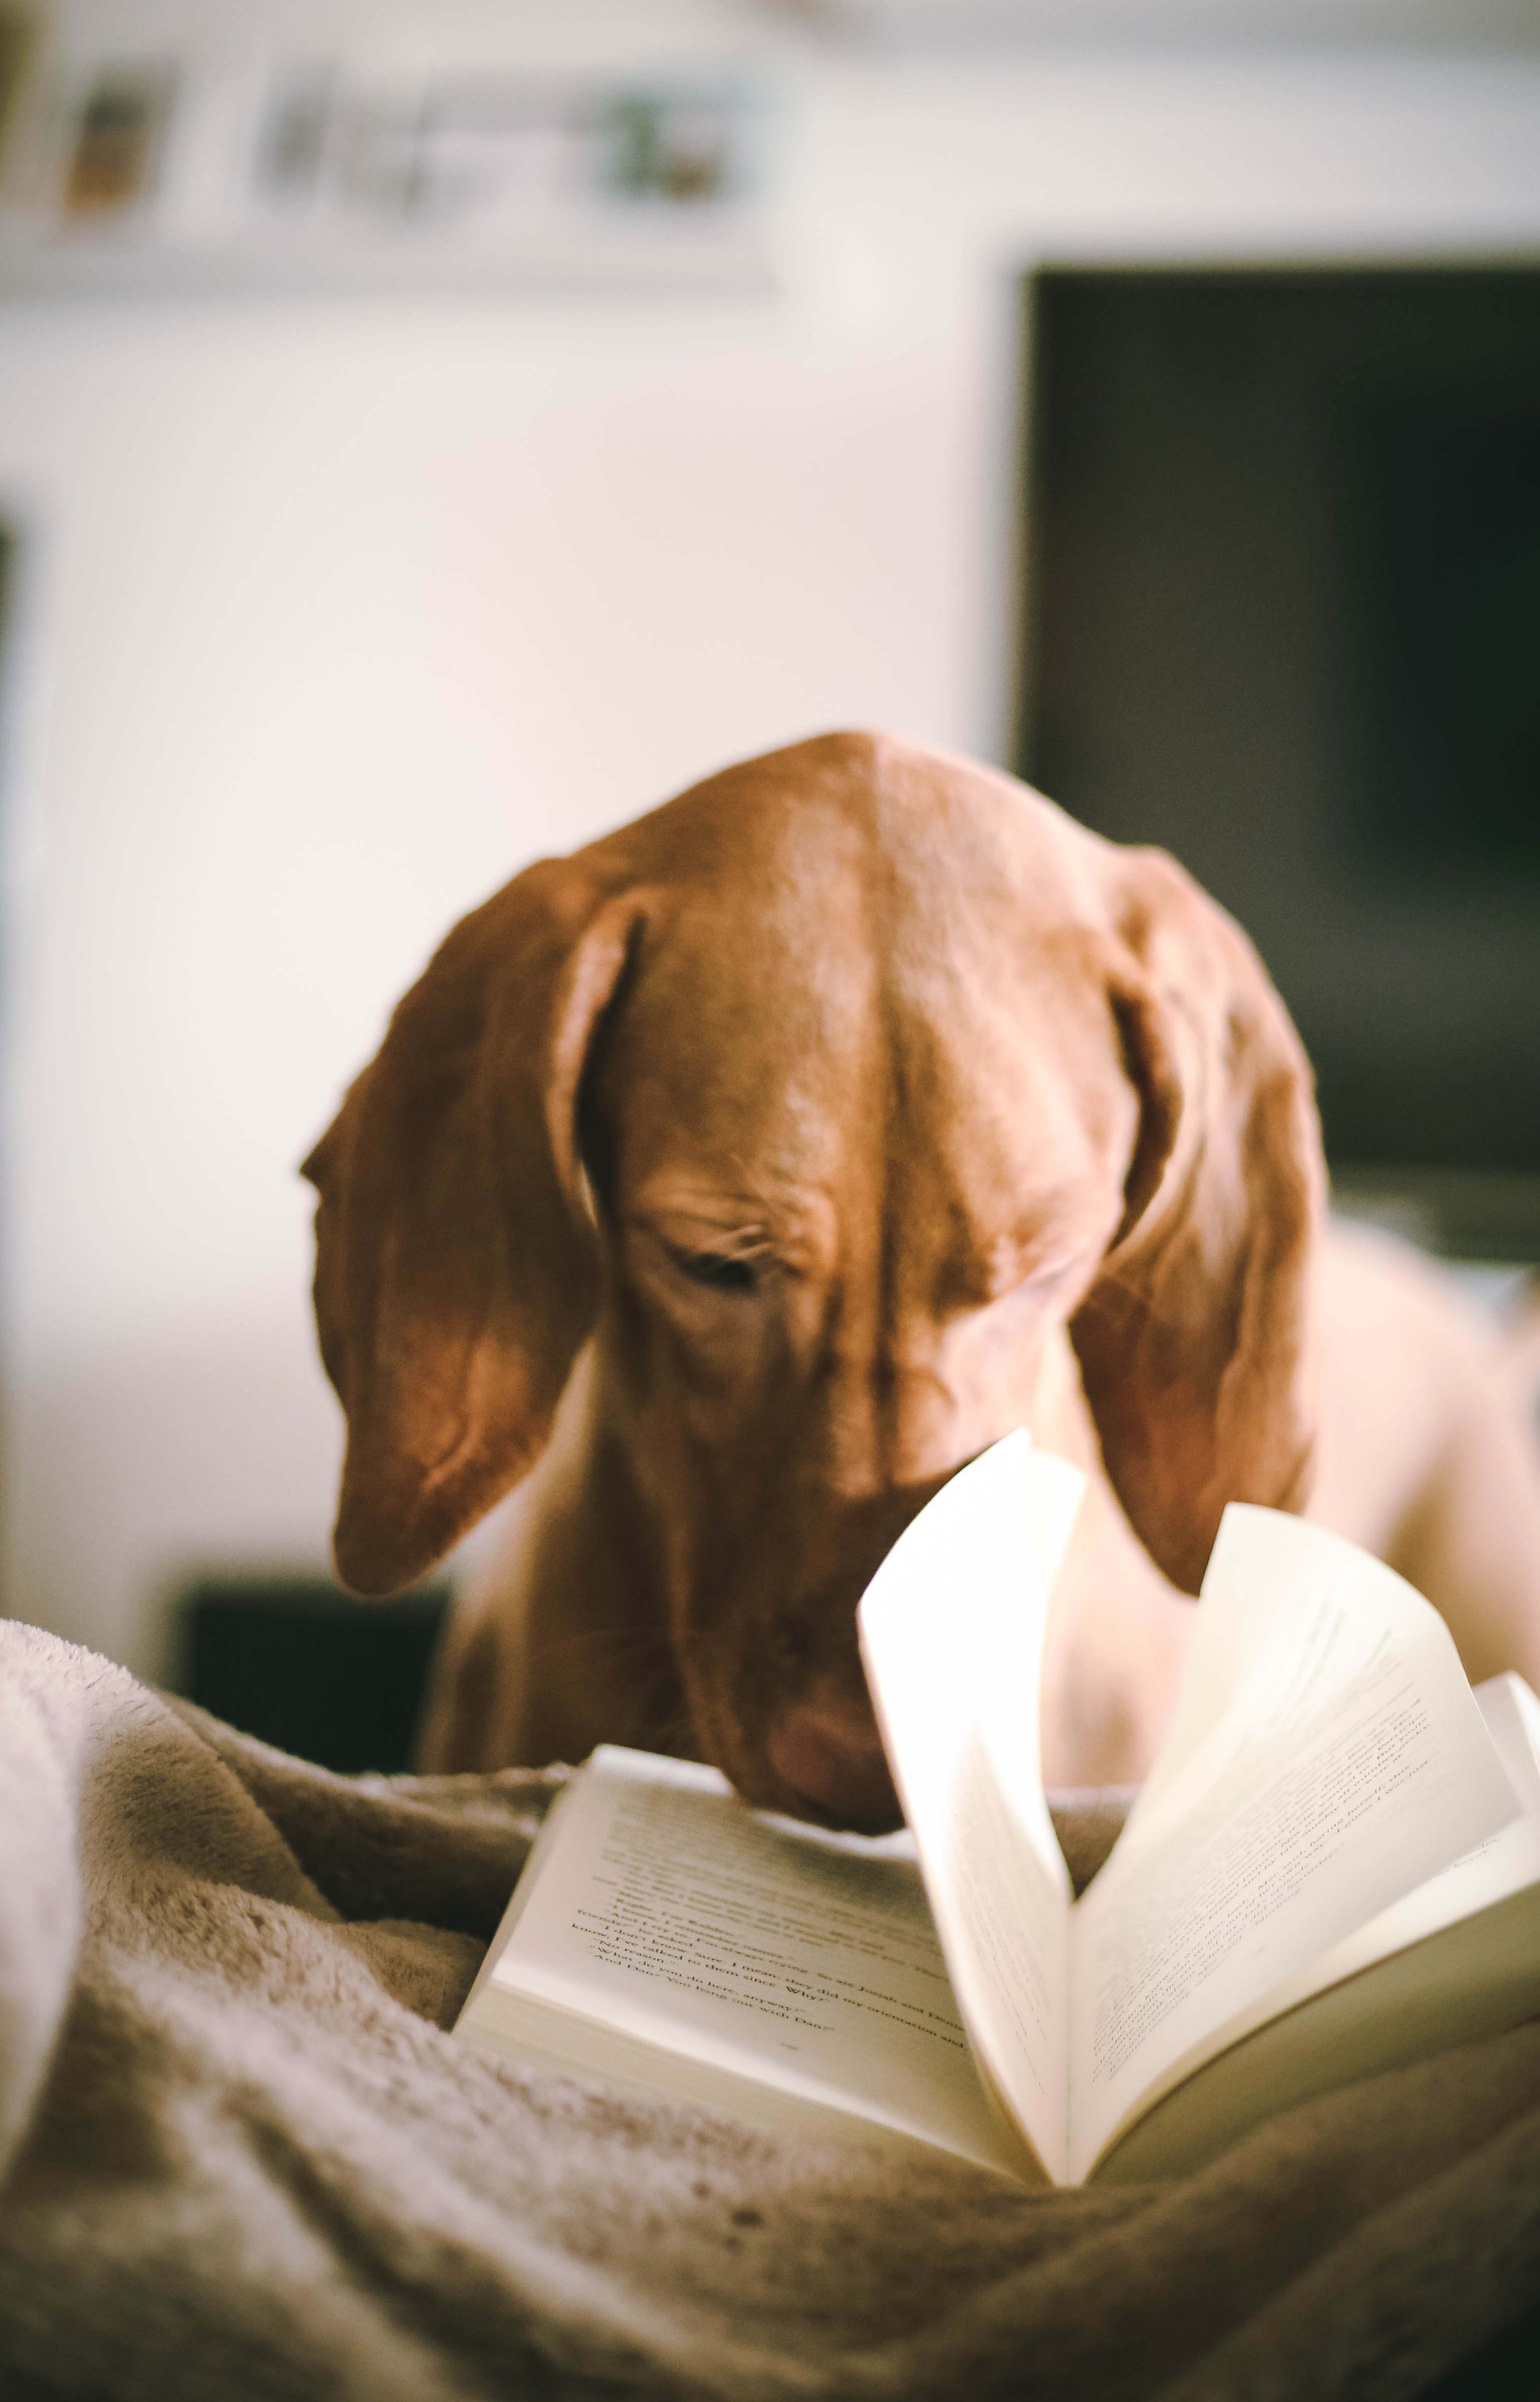 A book is laying open on a blanket and a dog with reddish/orange fur and long ears, has its nose in the book.